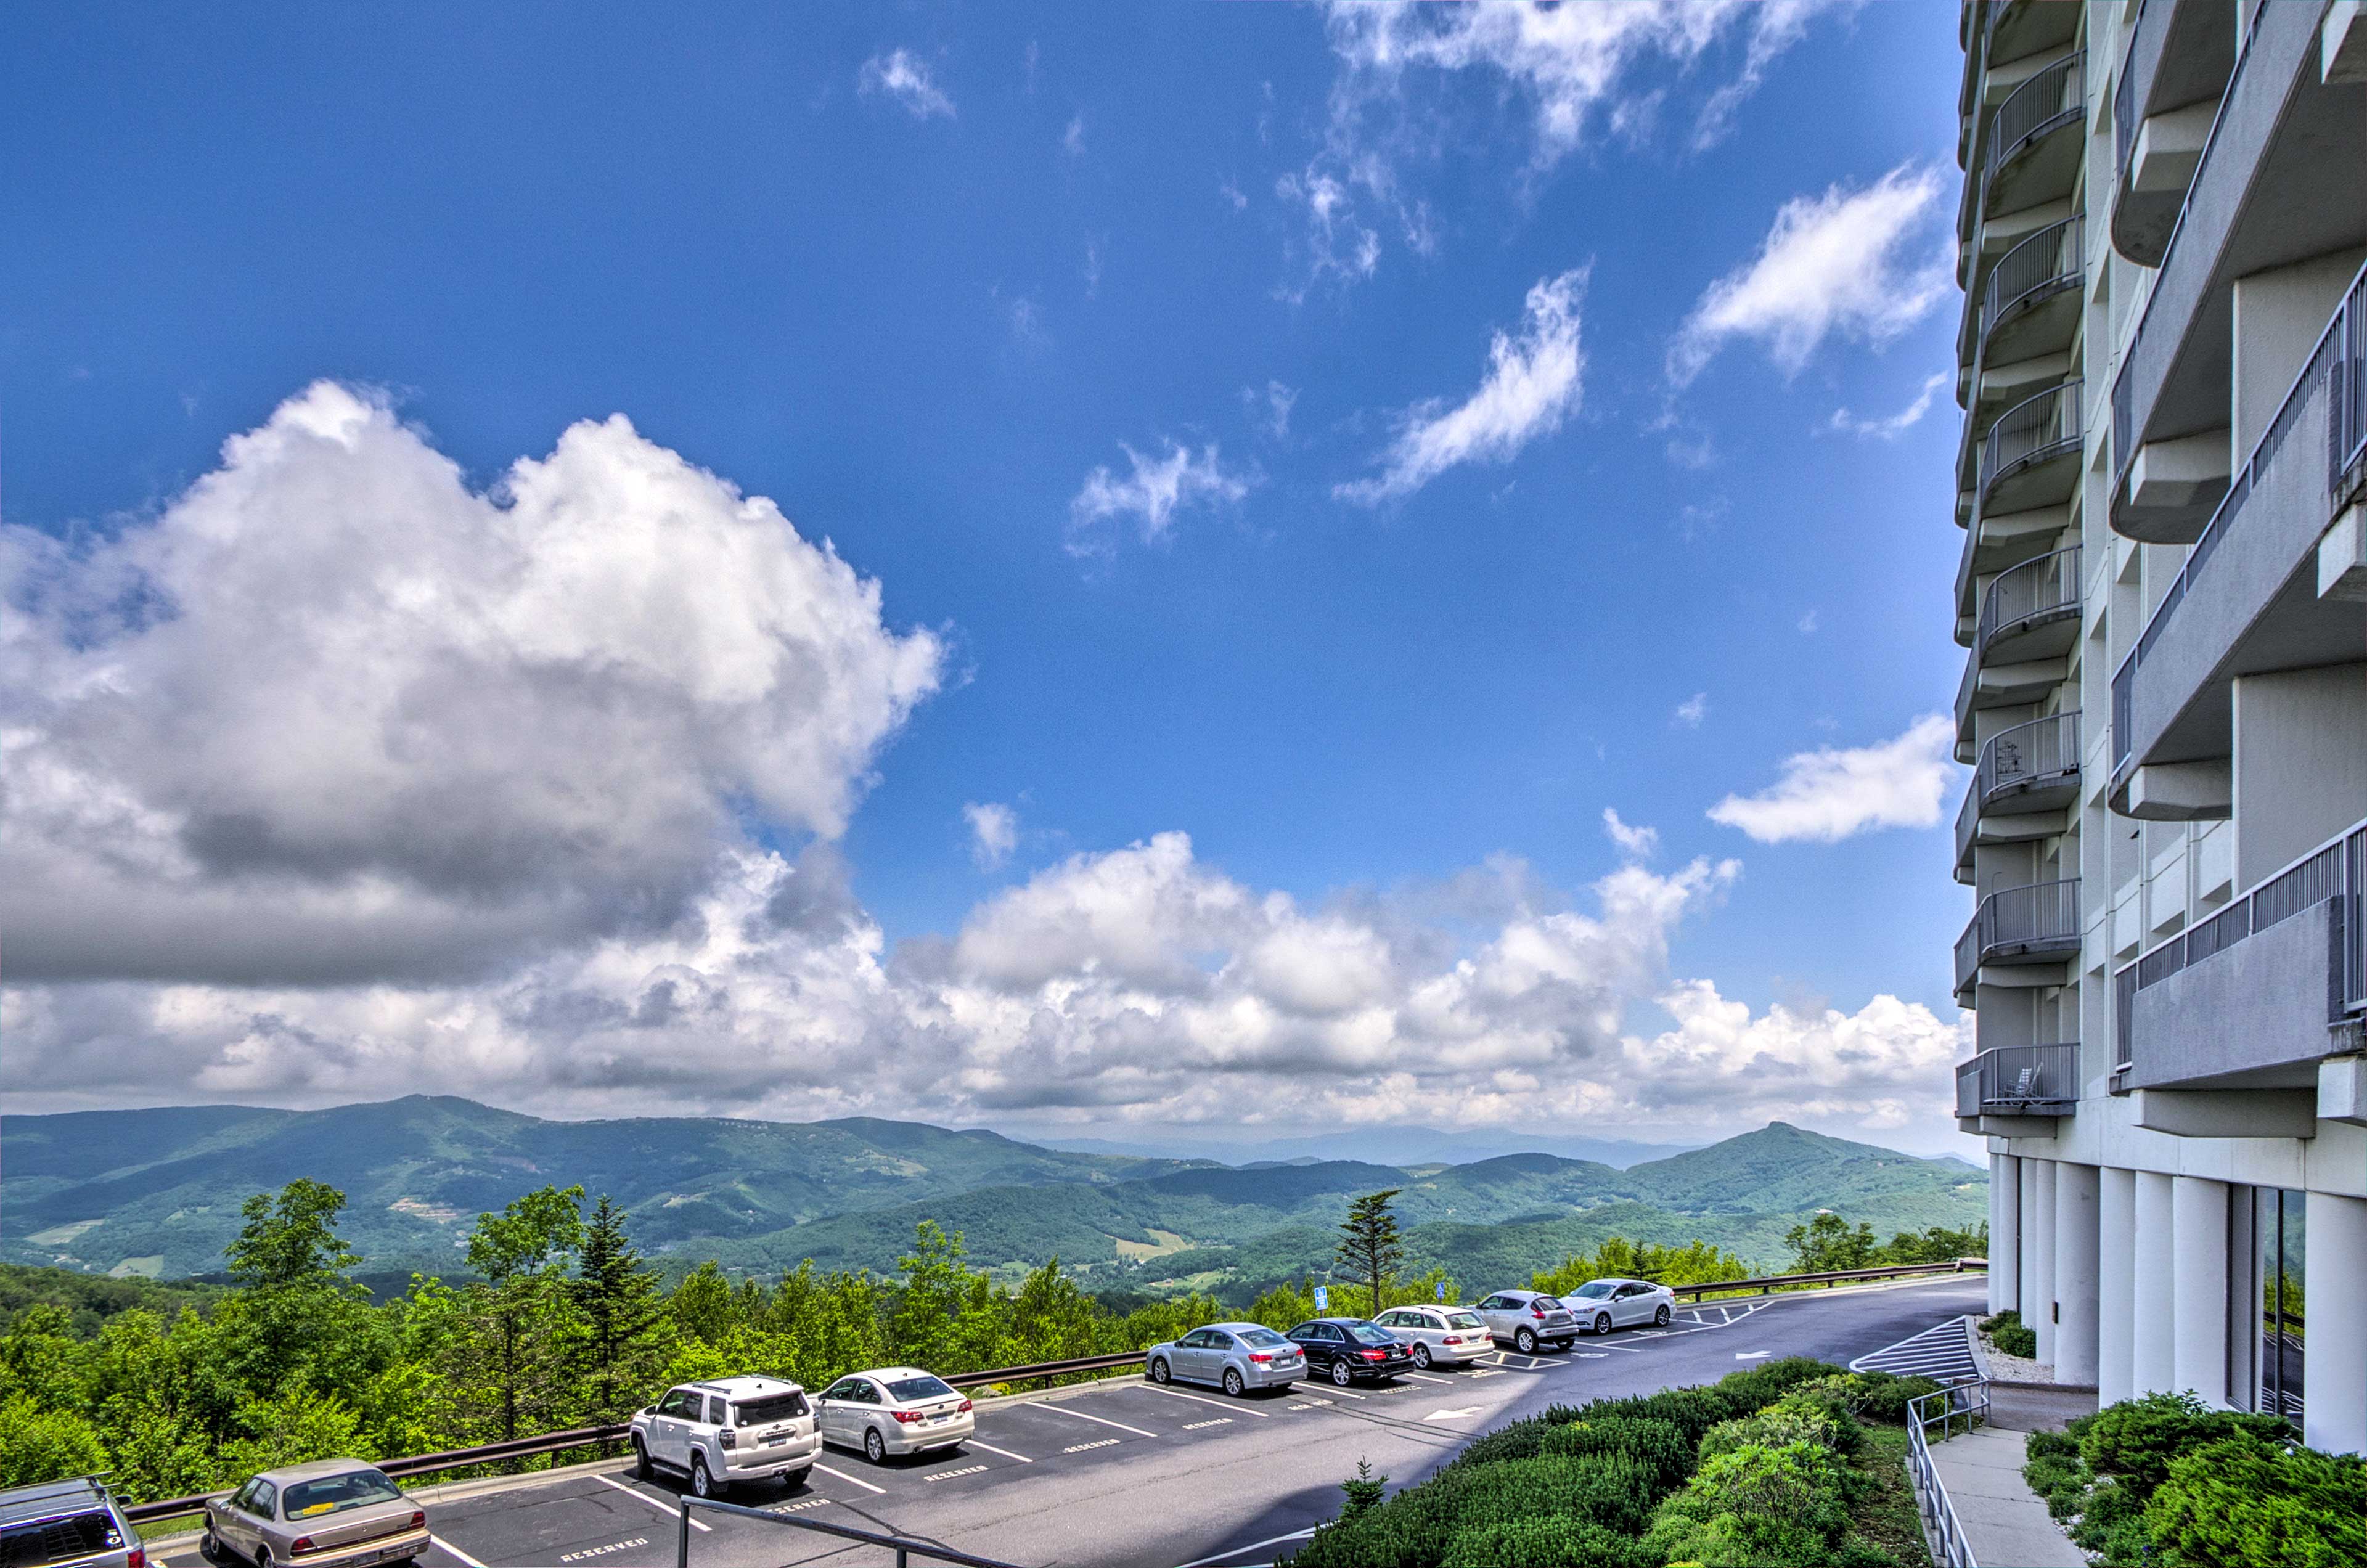 This 2-bed, 2-bath condo boasts a community pool, Jacuzzi, gym & mountain views!